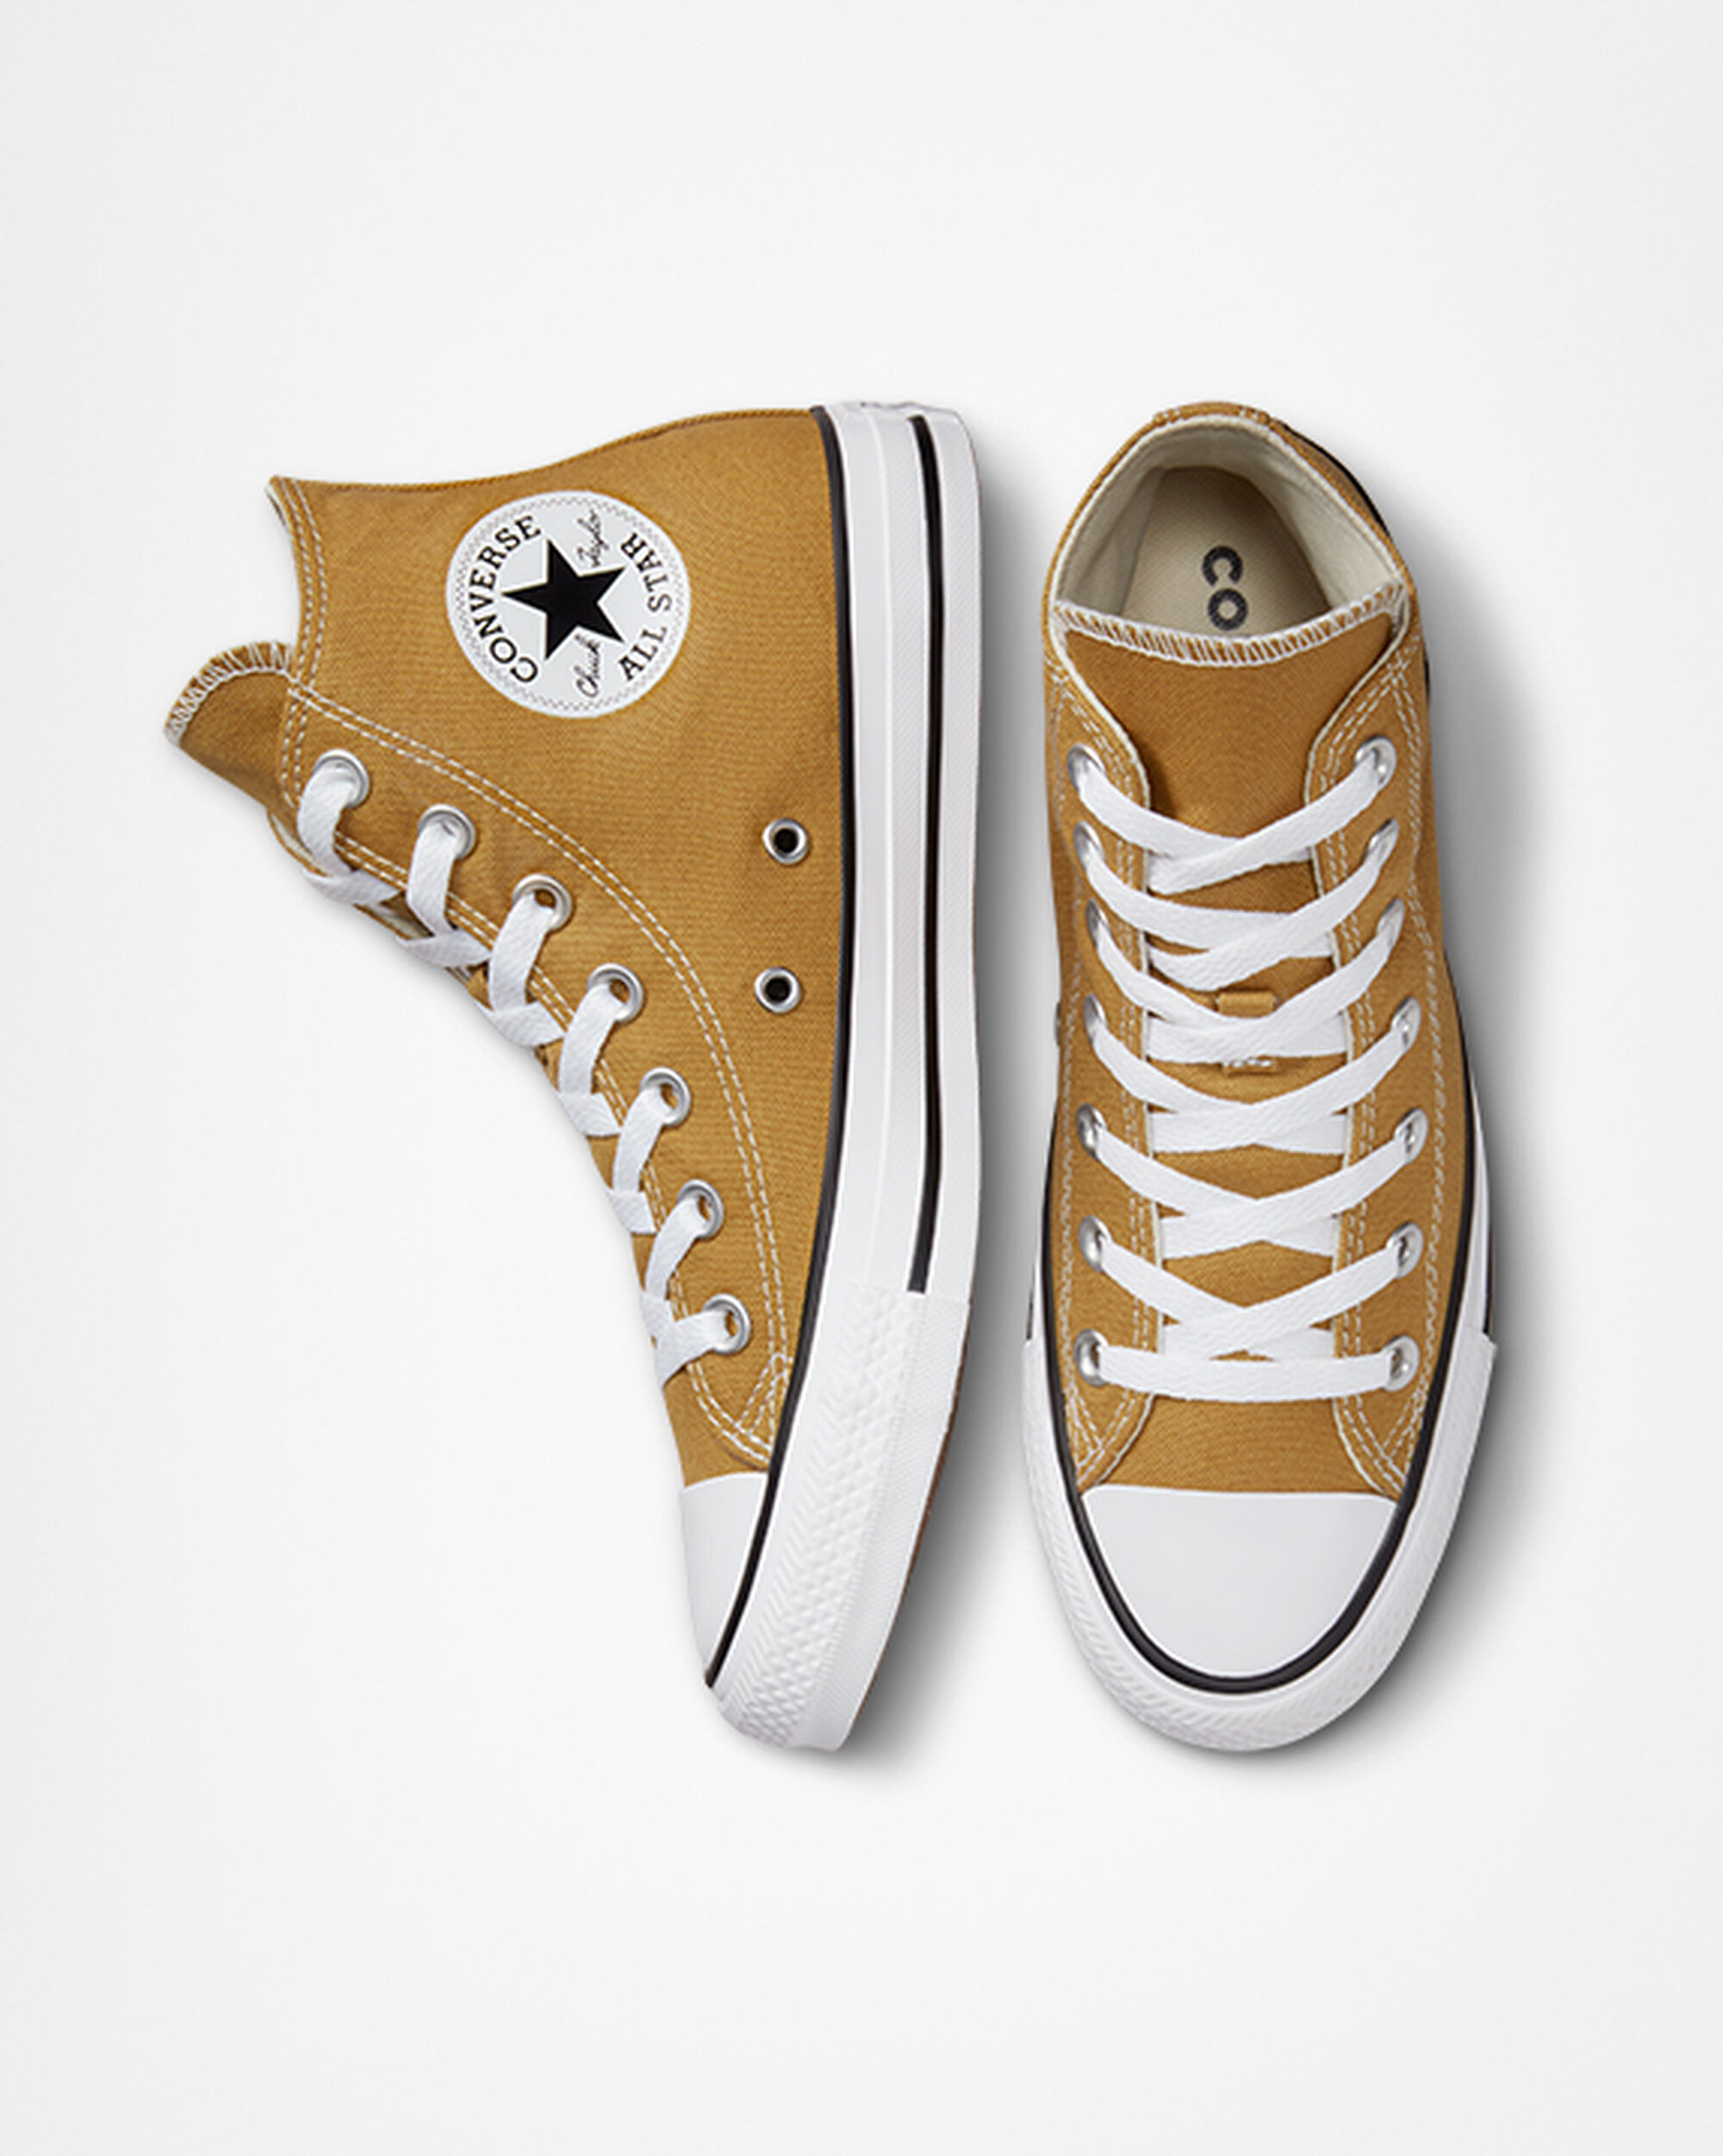 converse-chuck-taylor-all-star-classic-high-shoes-a02785f